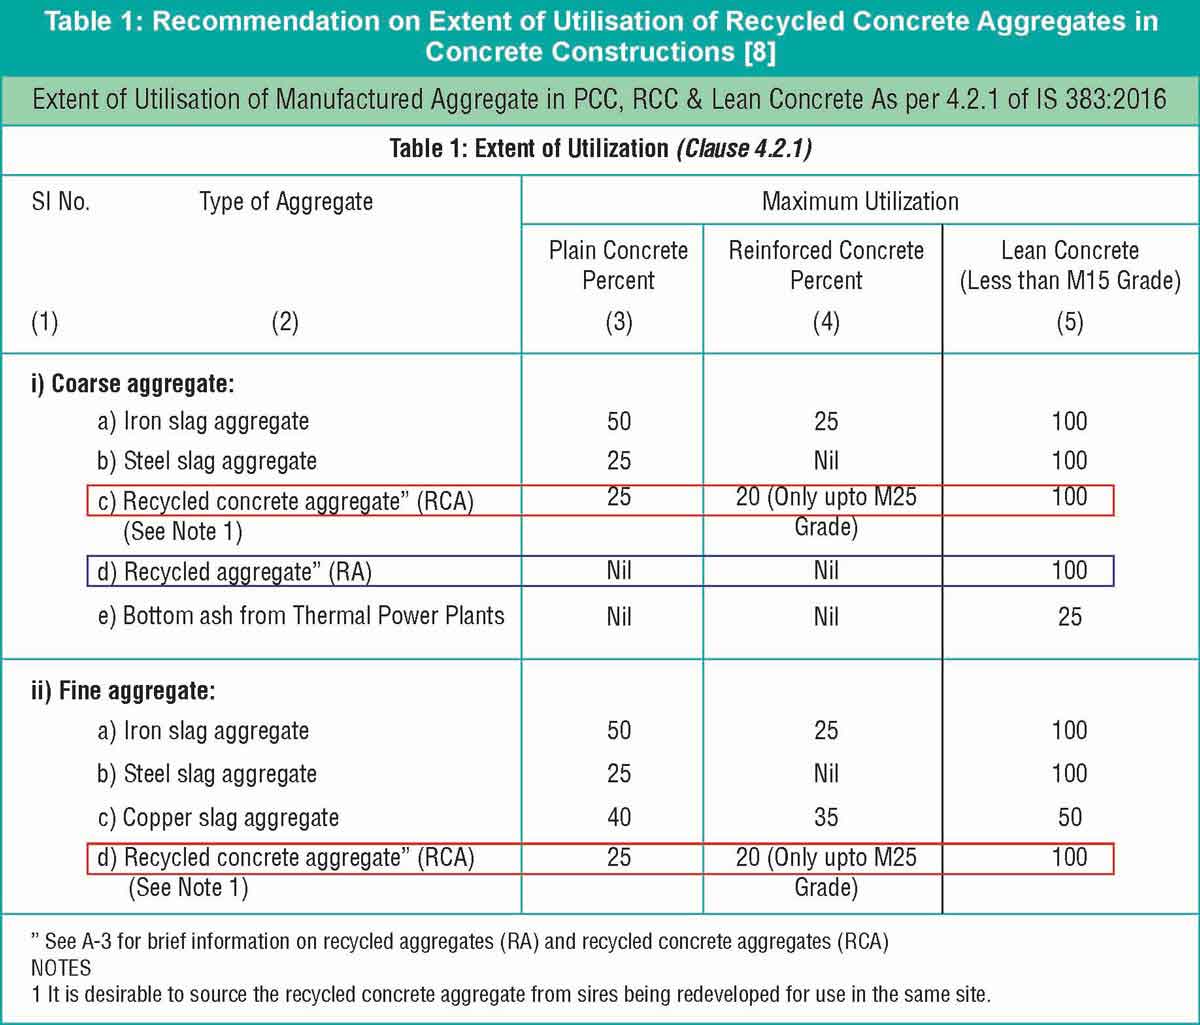 Recommendation on Extent of Utilisation of Recycled Concrete Aggregates in Concrete Constructions